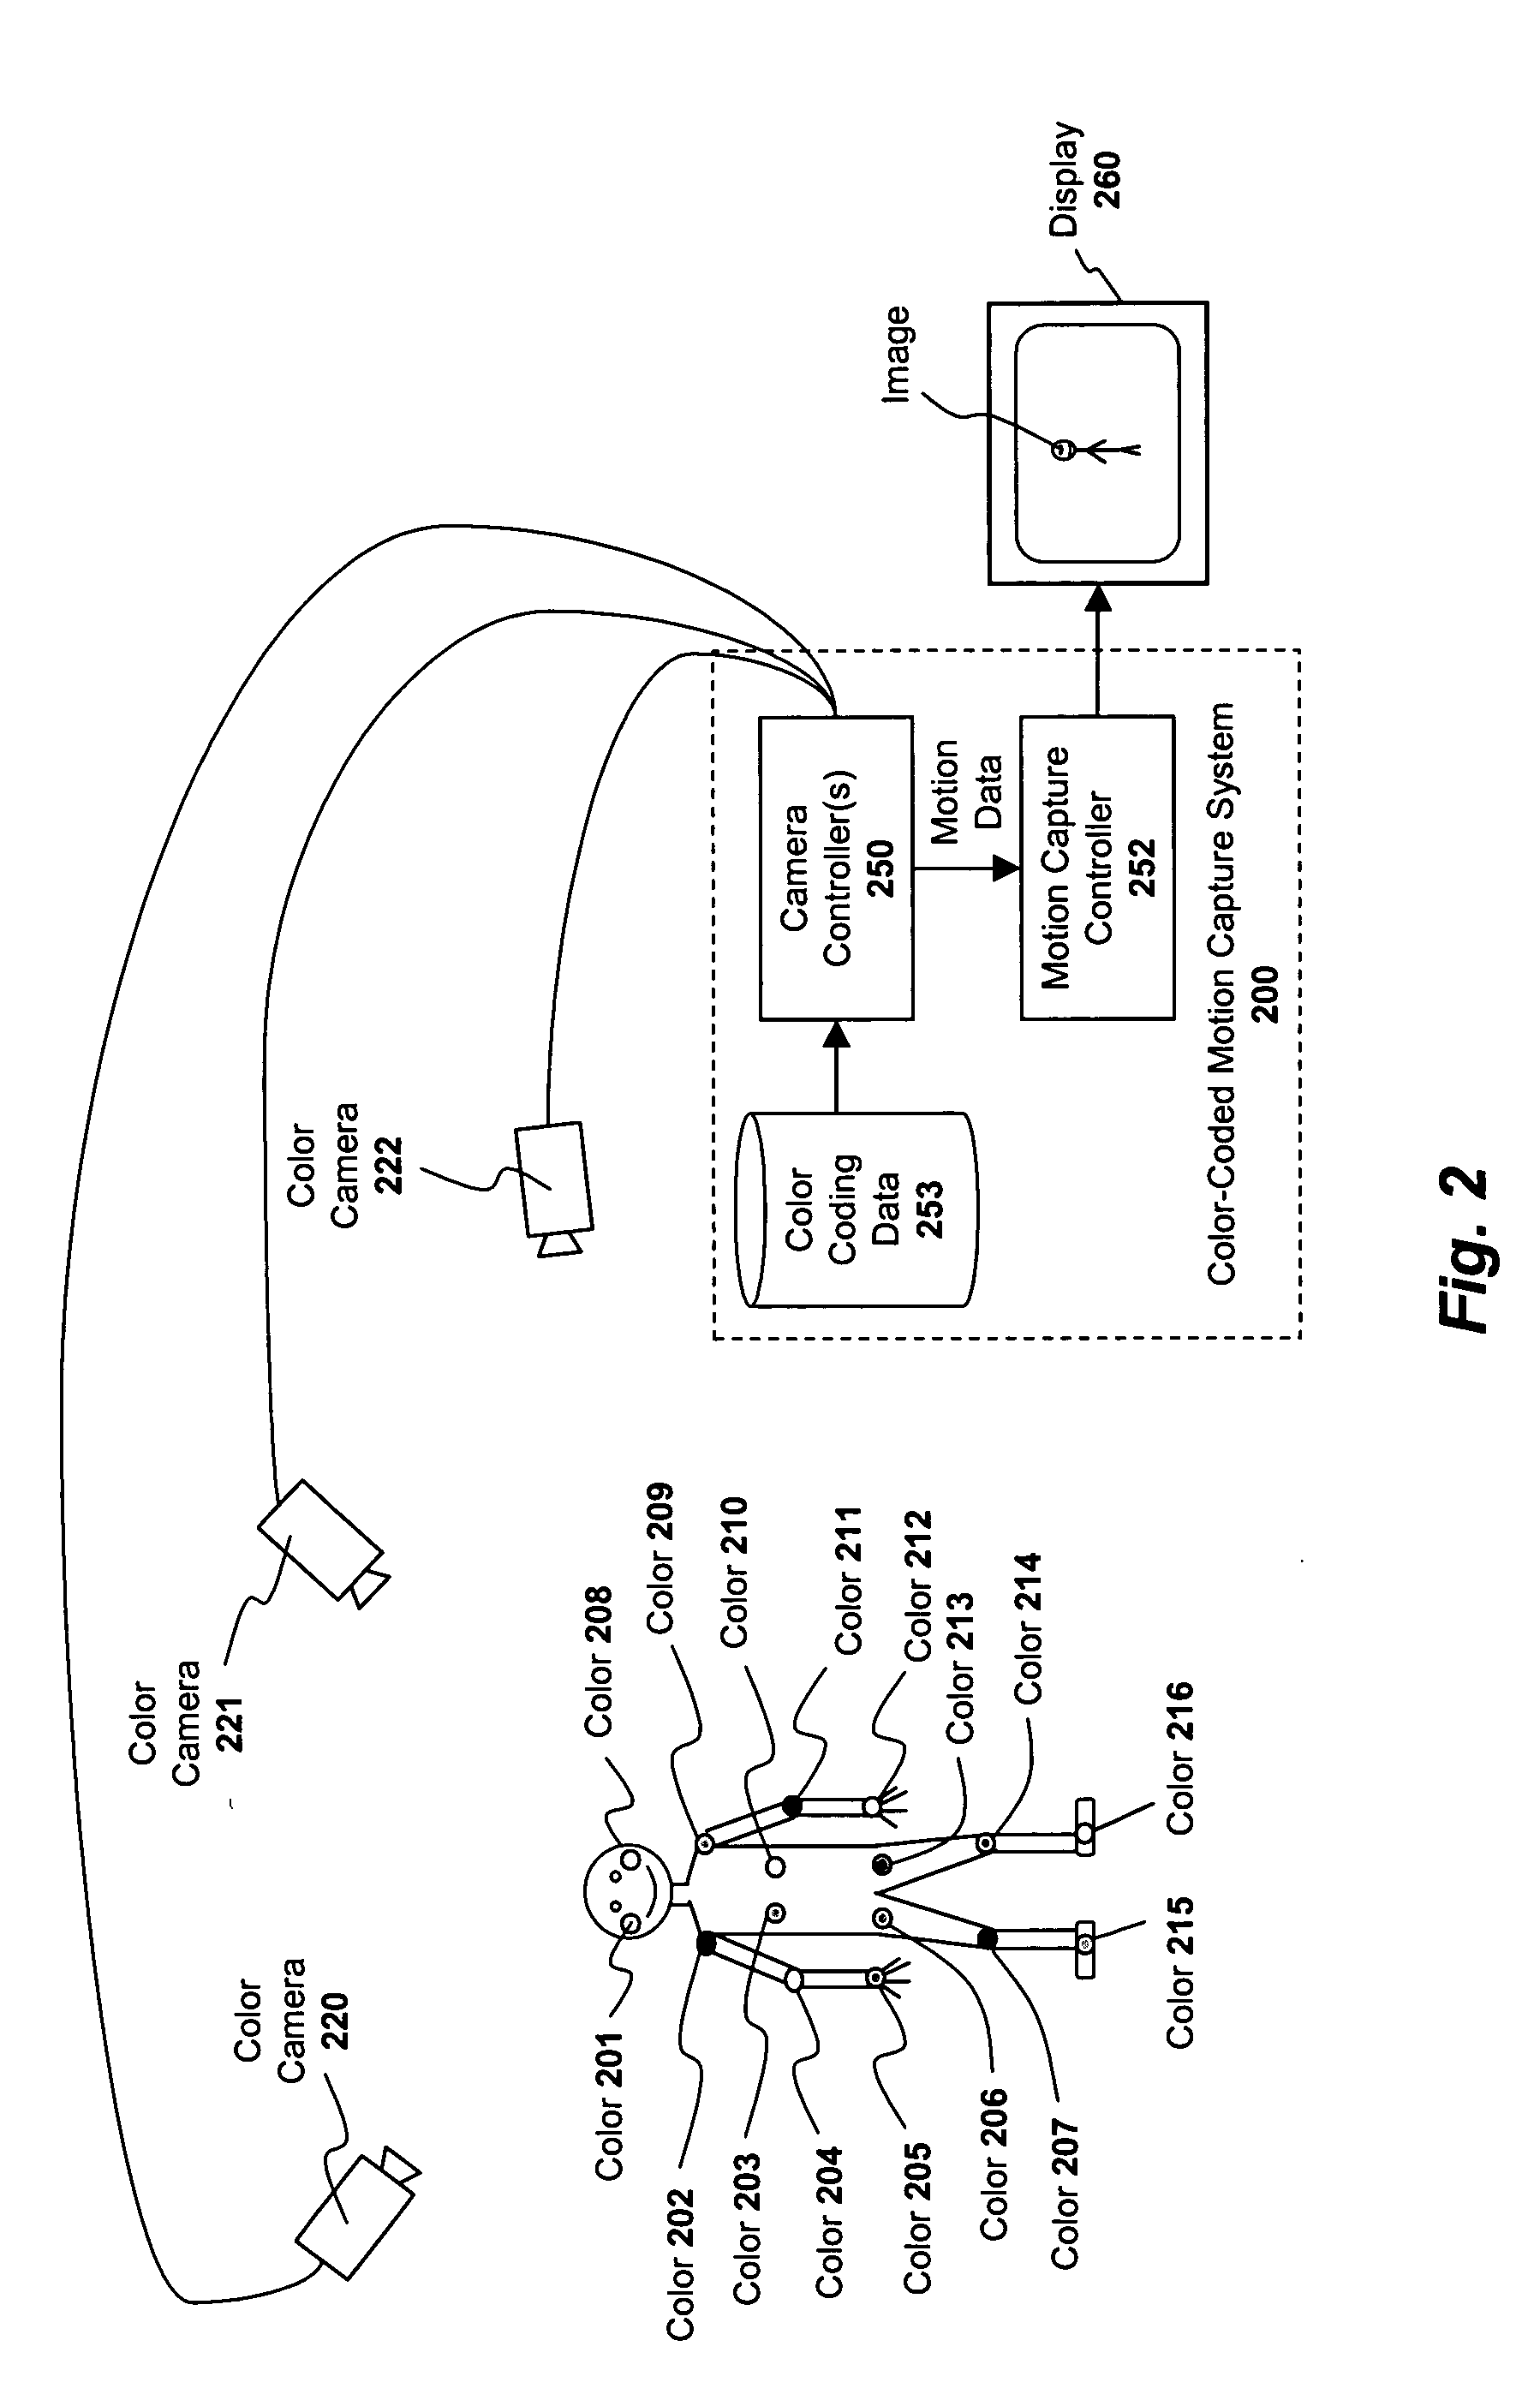 Apparatus and method for capturing the expression of a performer